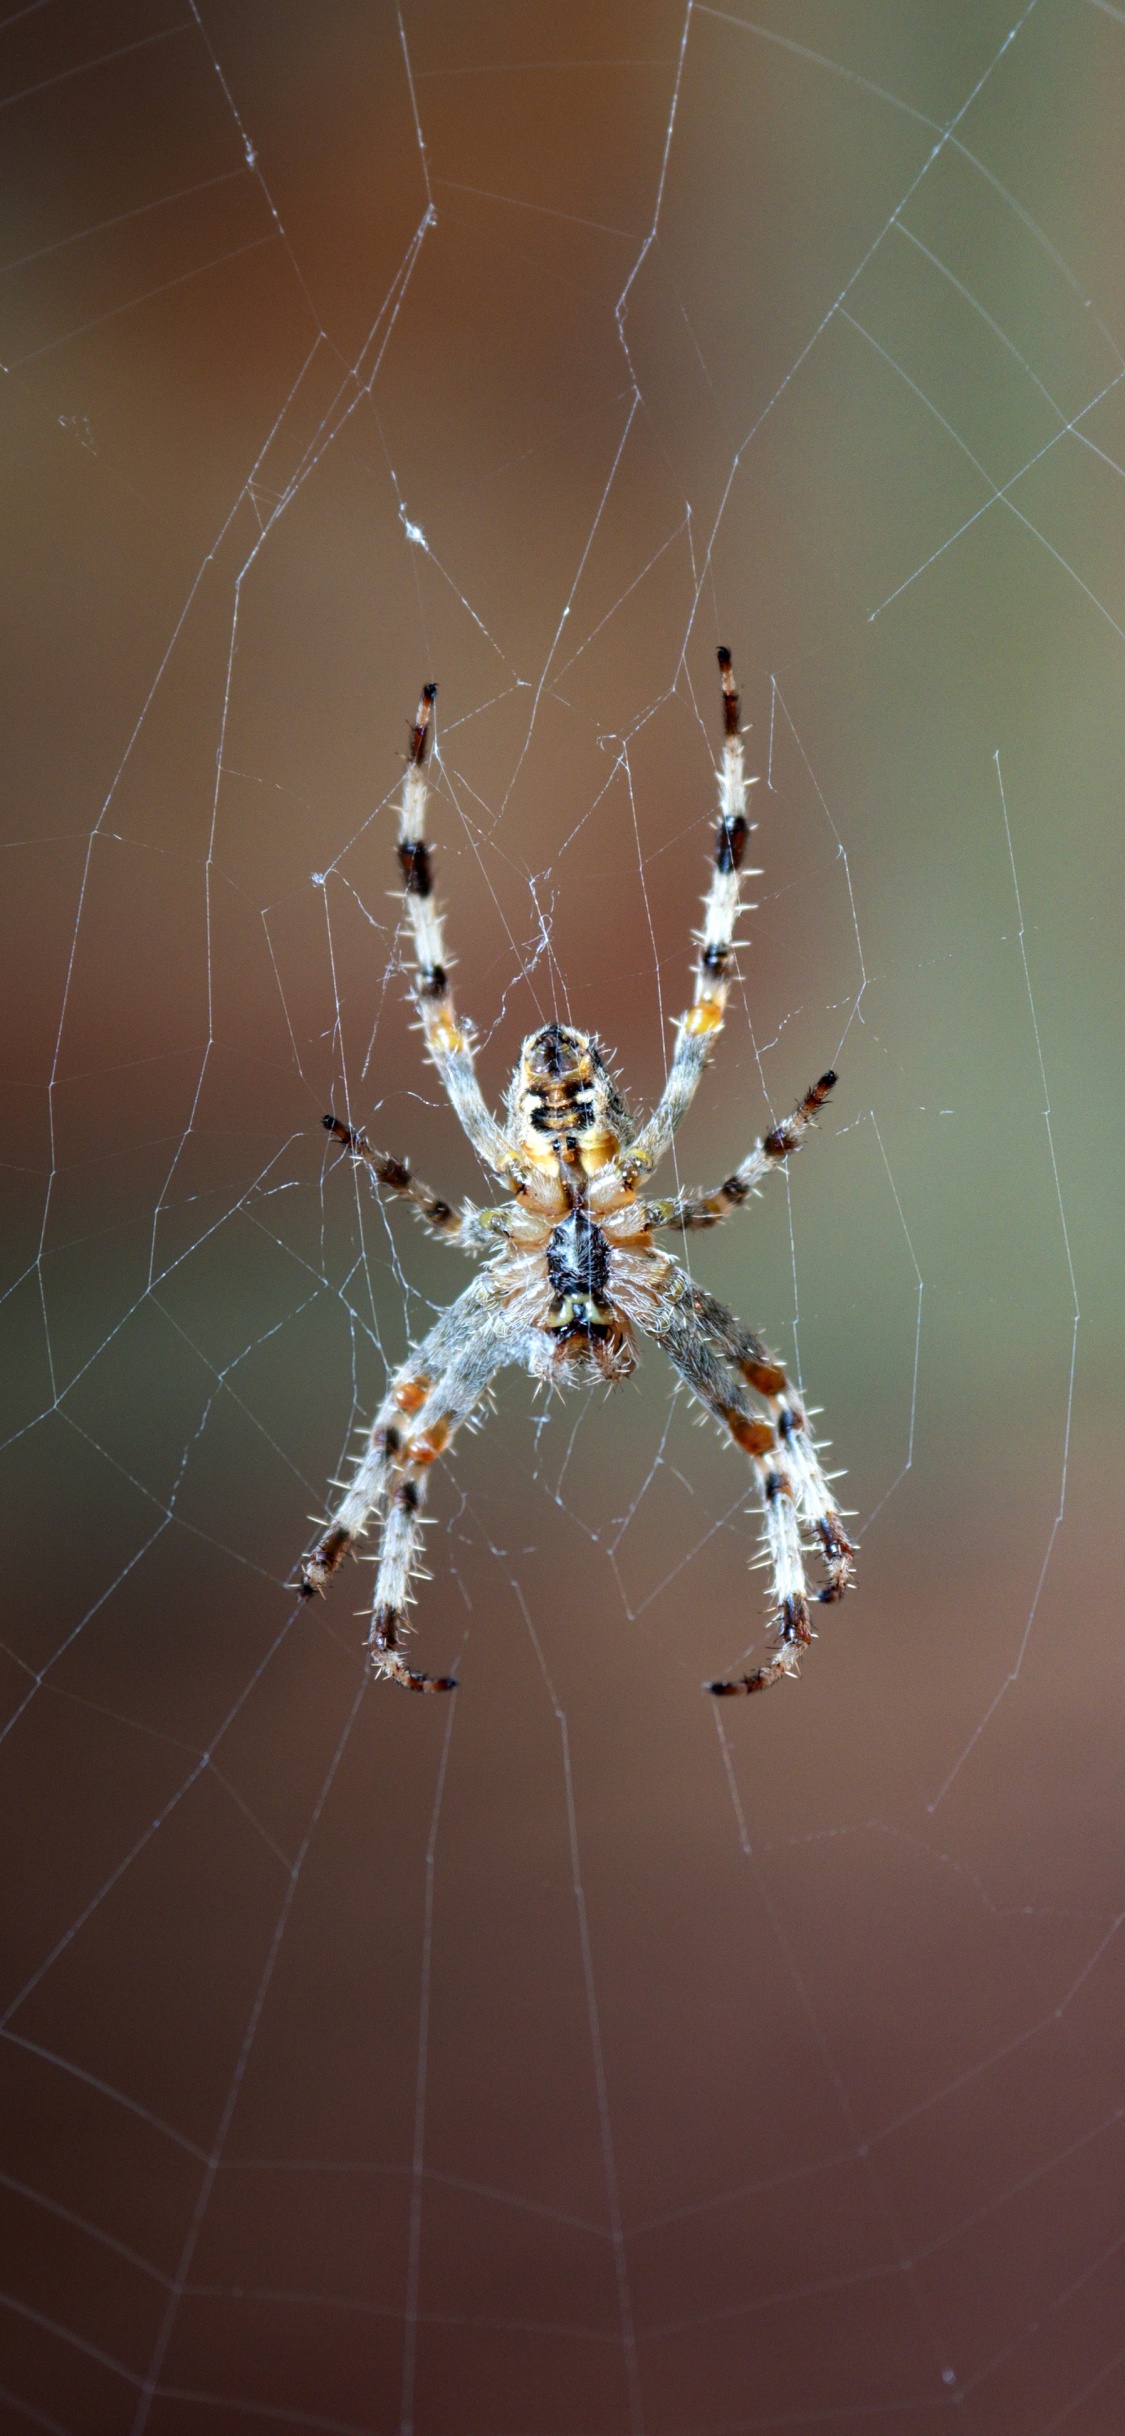 Brown and Black Spider on Web in Close up Photography During Daytime. Wallpaper in 1125x2436 Resolution